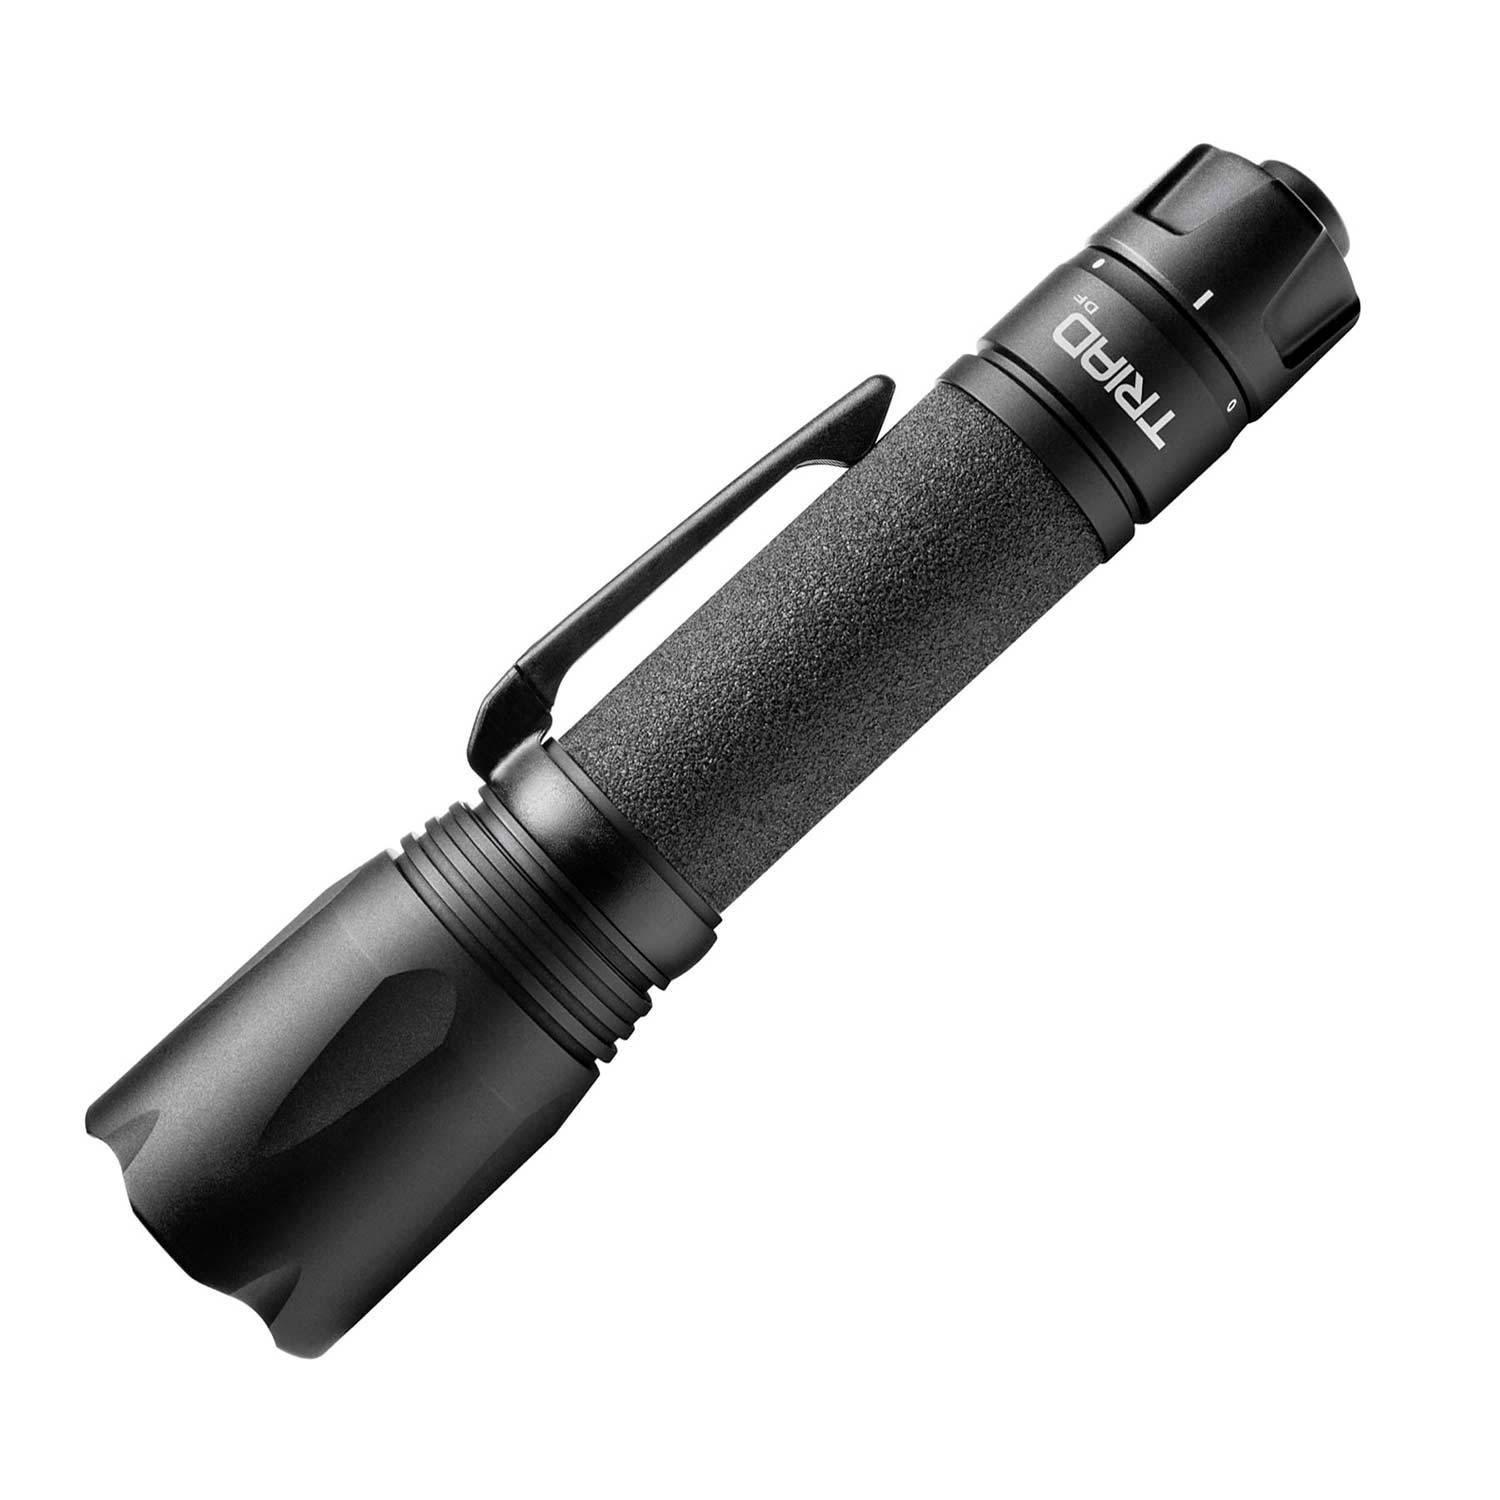 ASP Triad USB LED Rechargeable Flashlight with AC DC and USB